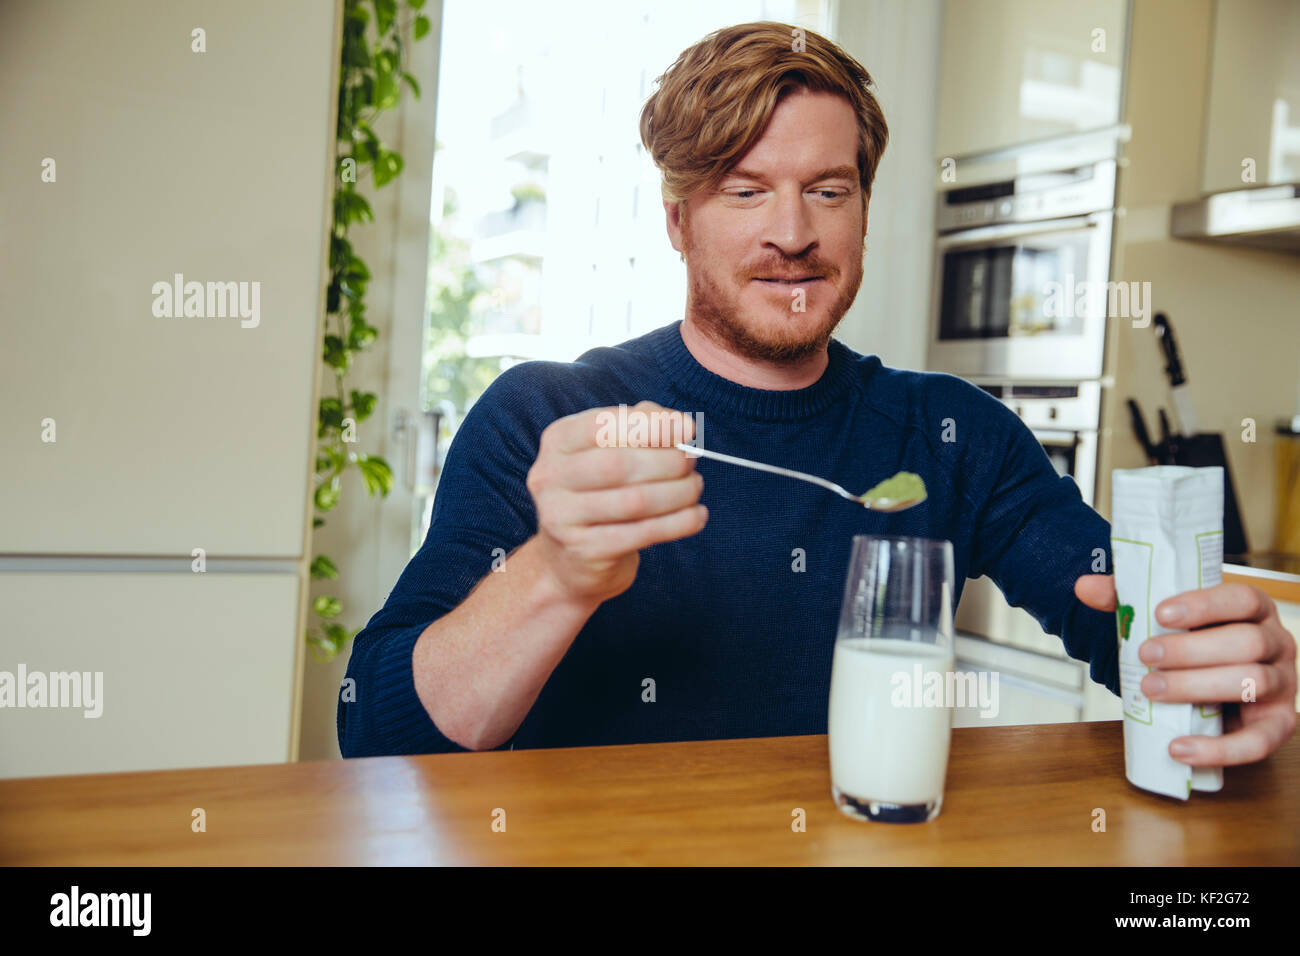 Man putting healthy green substance into a glass of milk Stock Photo